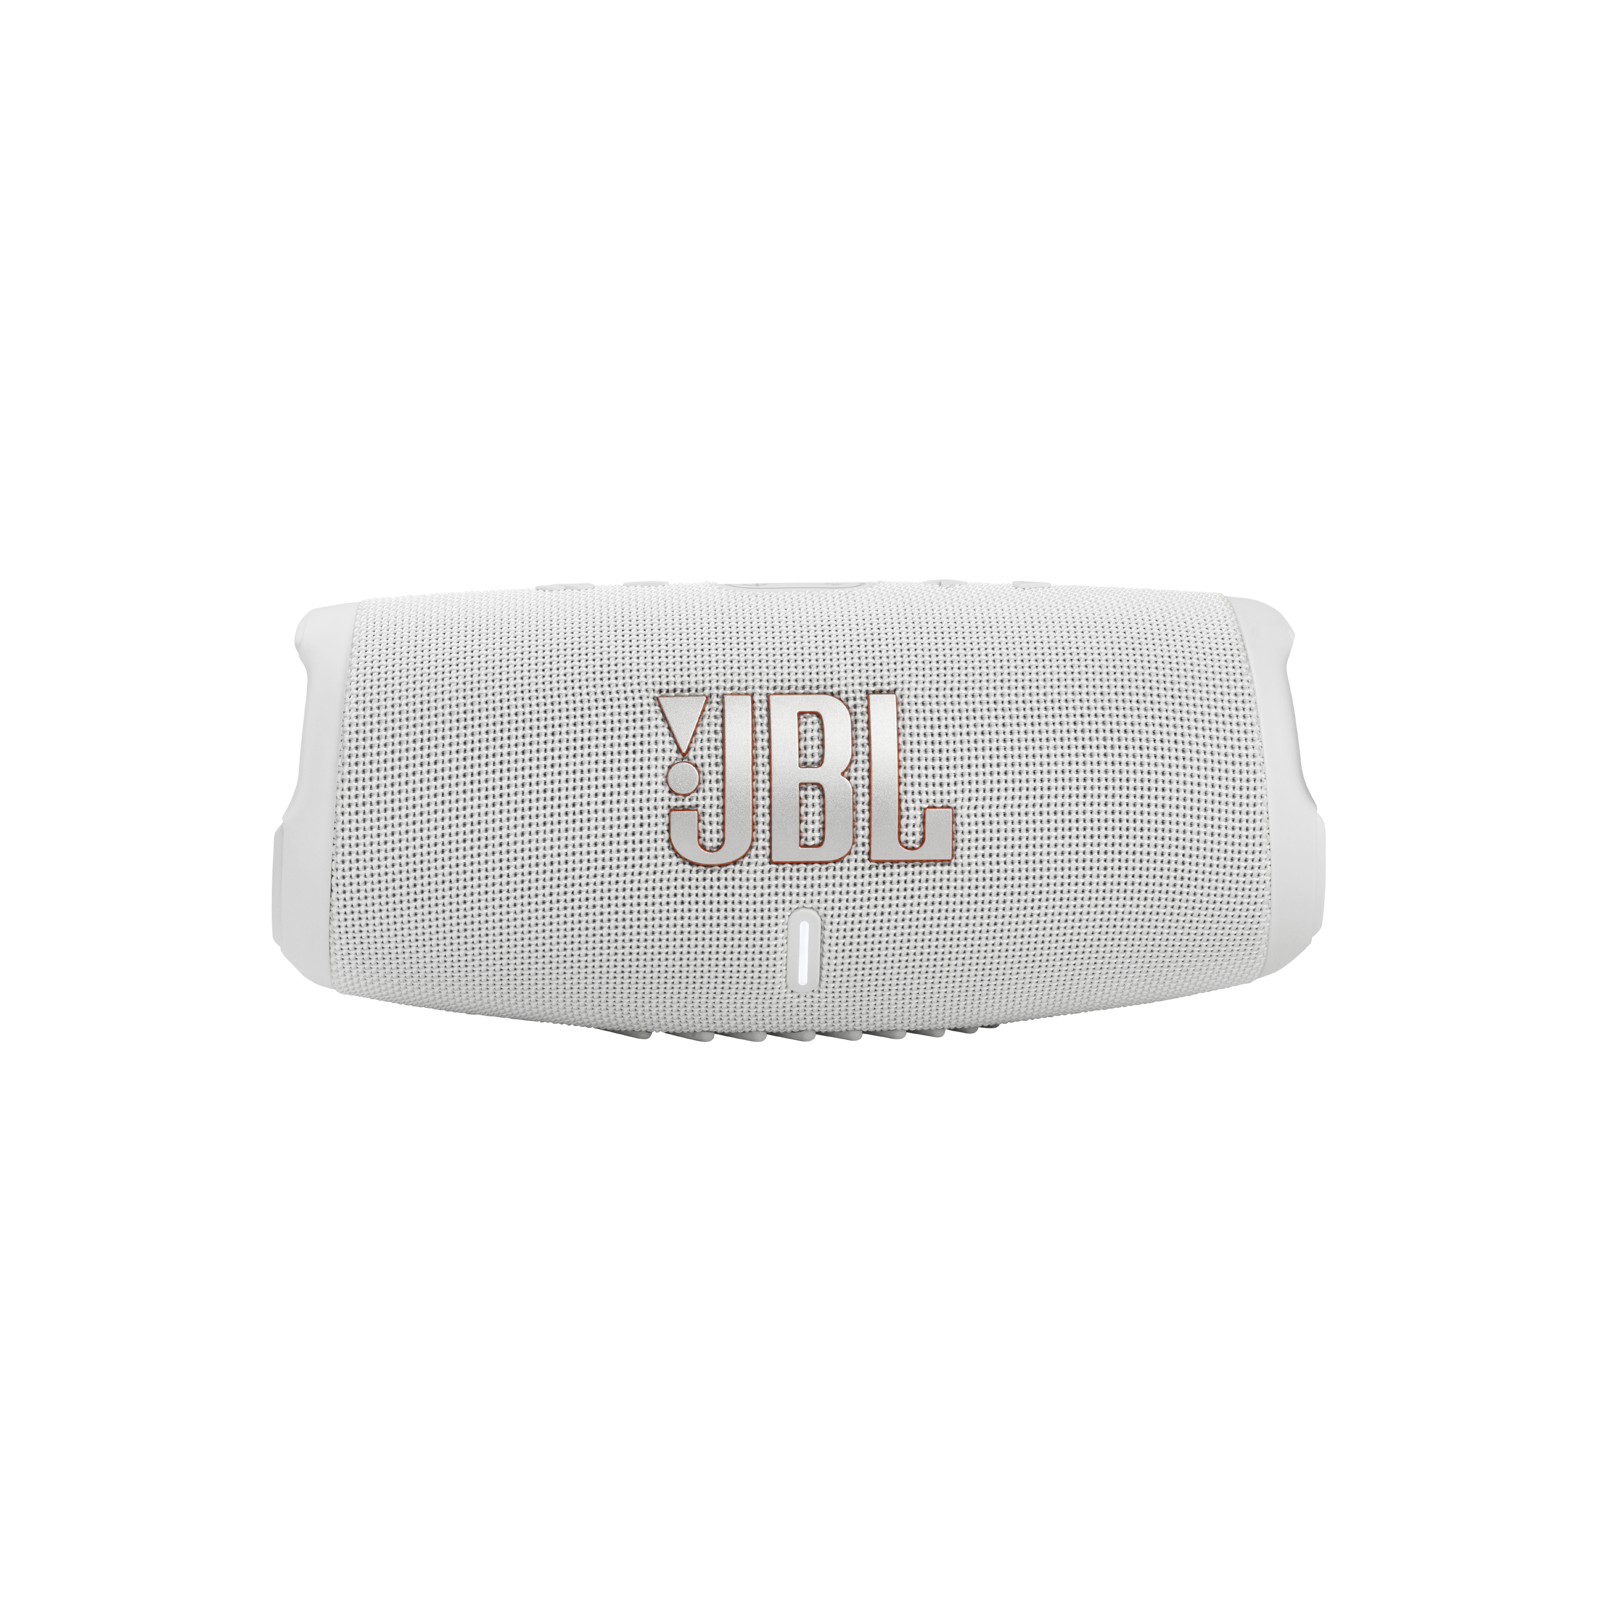 JBL Charge 5 - White - Portable Waterproof Speaker with Powerbank - Front